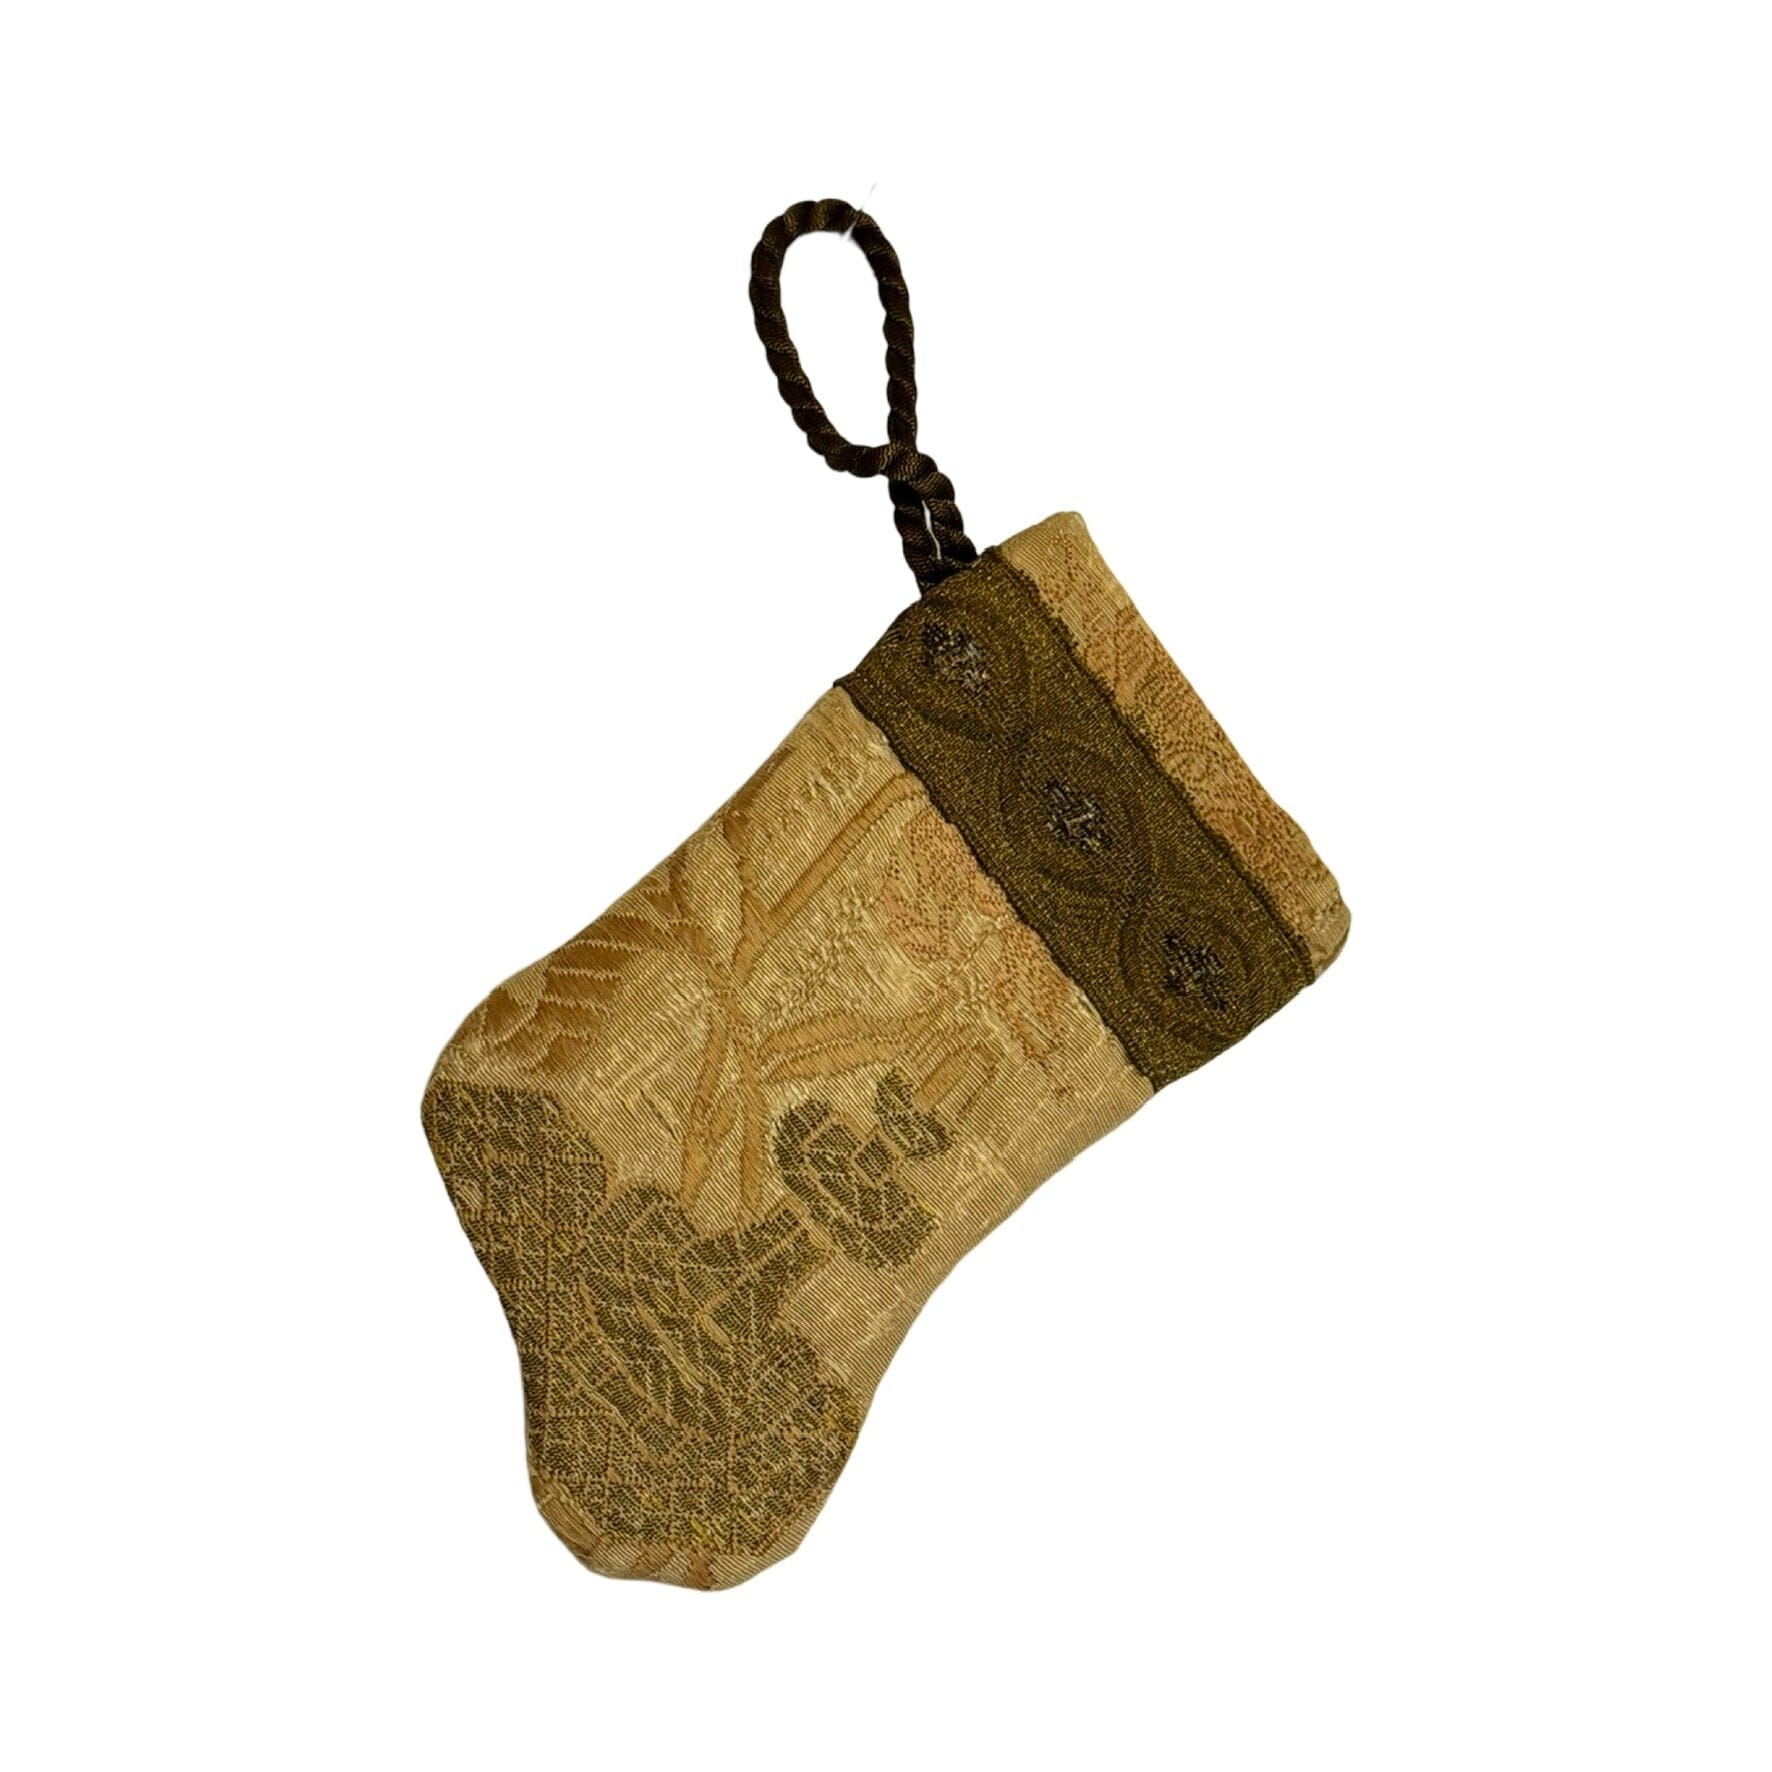 Handmade Mini Stocking Made From Vintage Fabric and Trims- Champagne Embroidery Ornament B. Viz Design F 